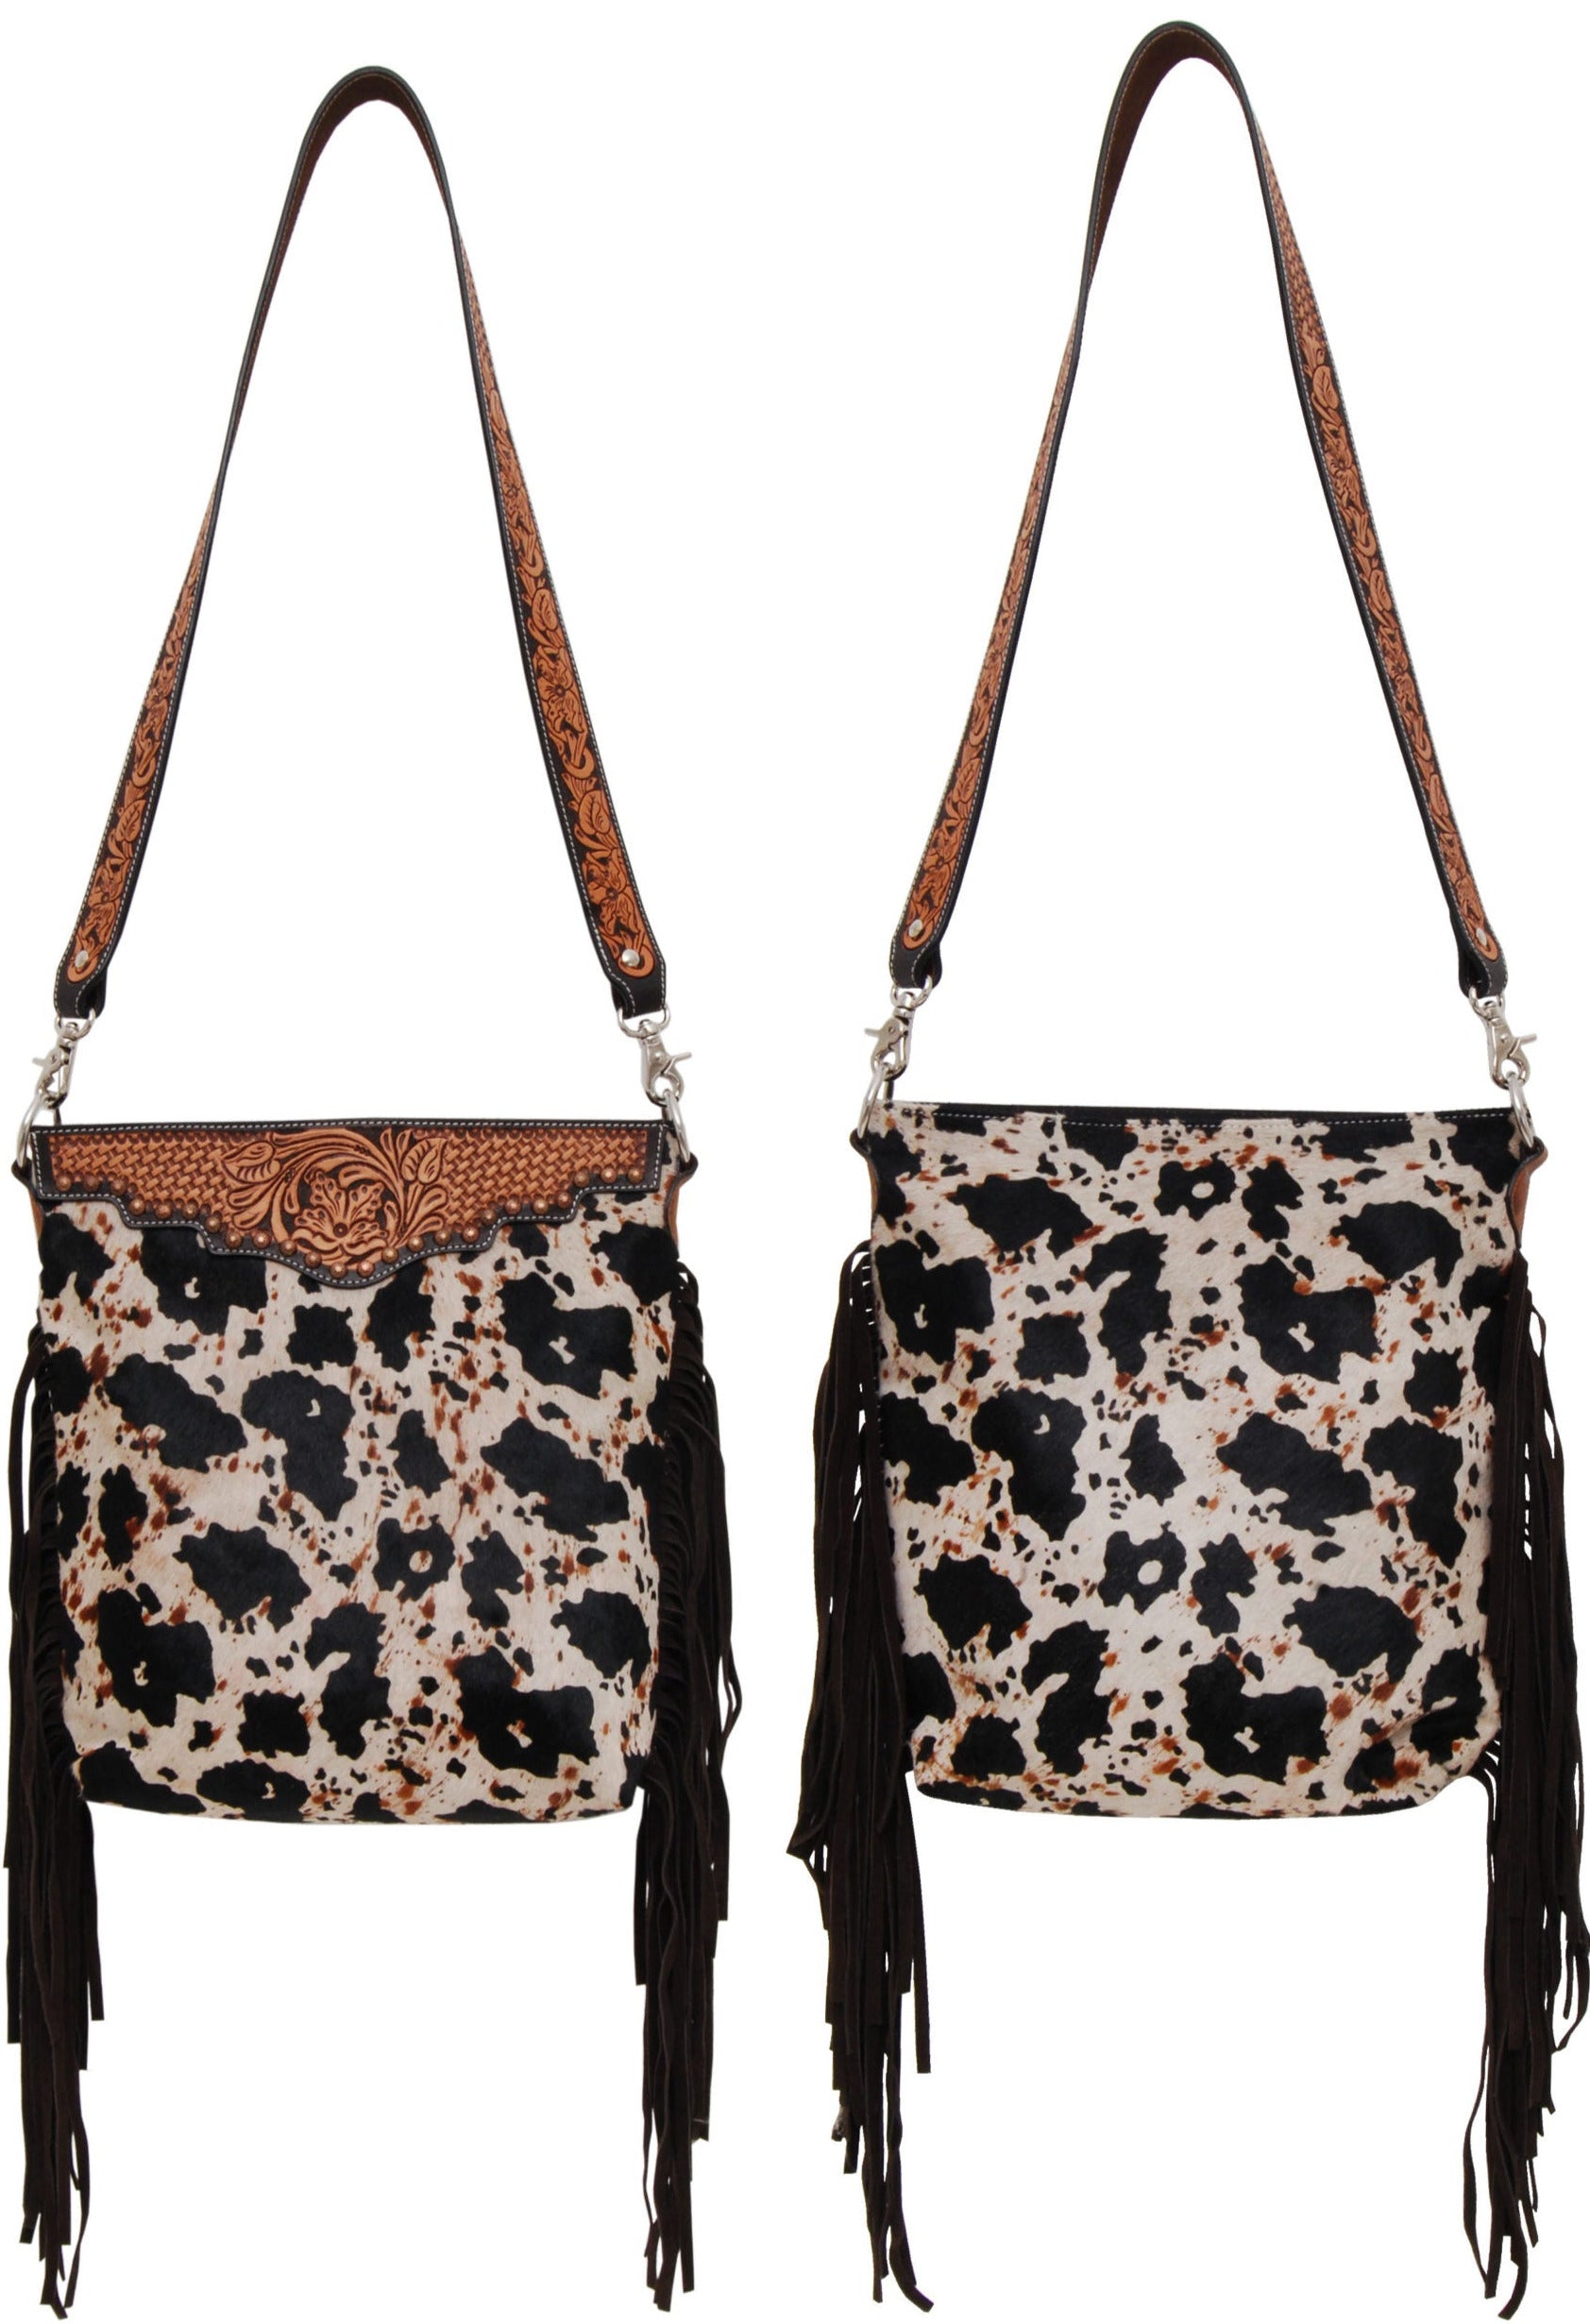 Rafter T Ranch Co. Crossbody Tote STYLE BL522